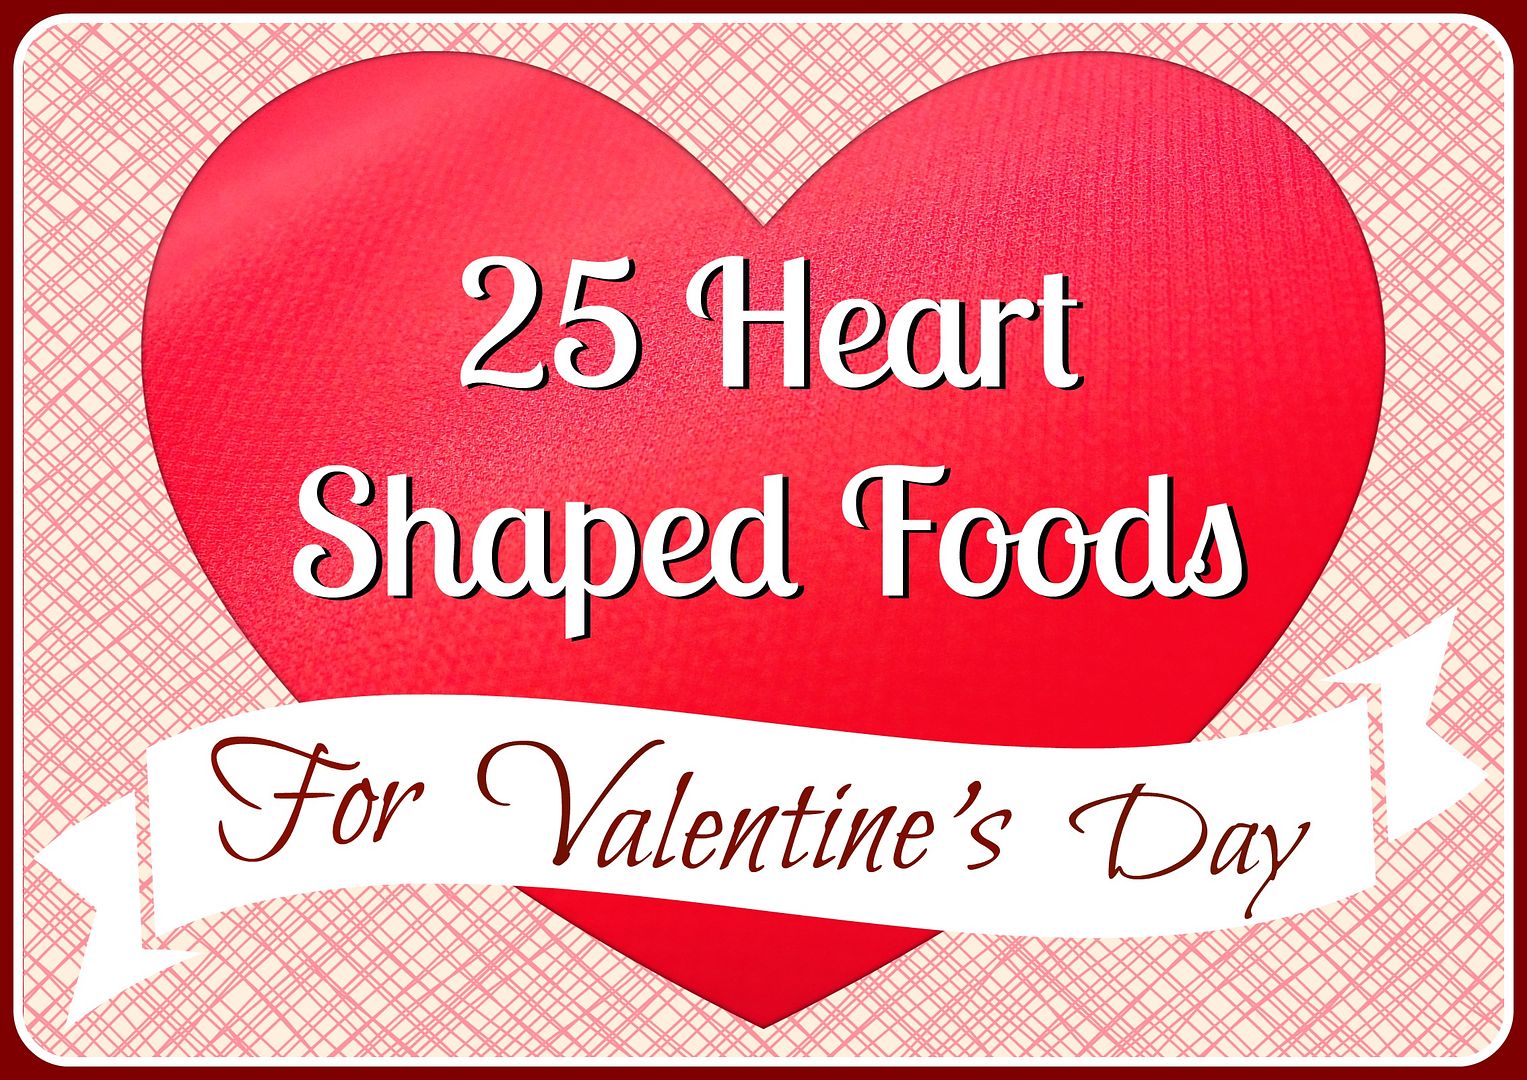 25 Heart Shaped Foods for Valentine's Day (or any other special occasion!)